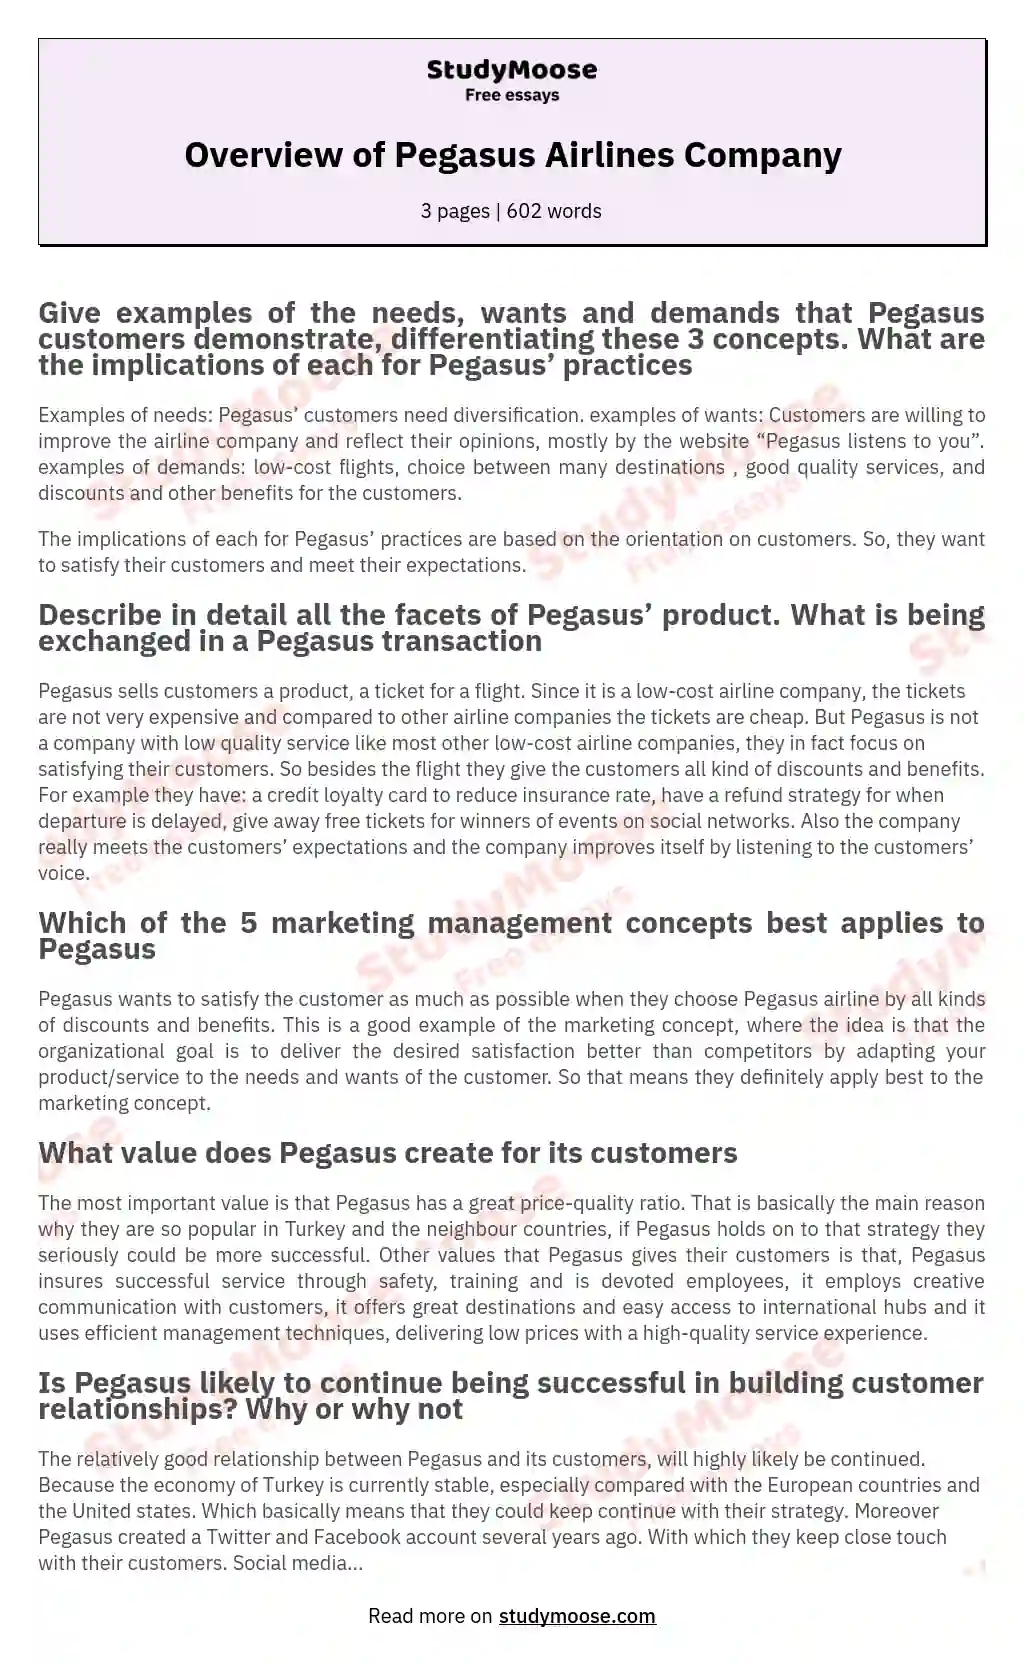 Overview of Pegasus Airlines Company essay